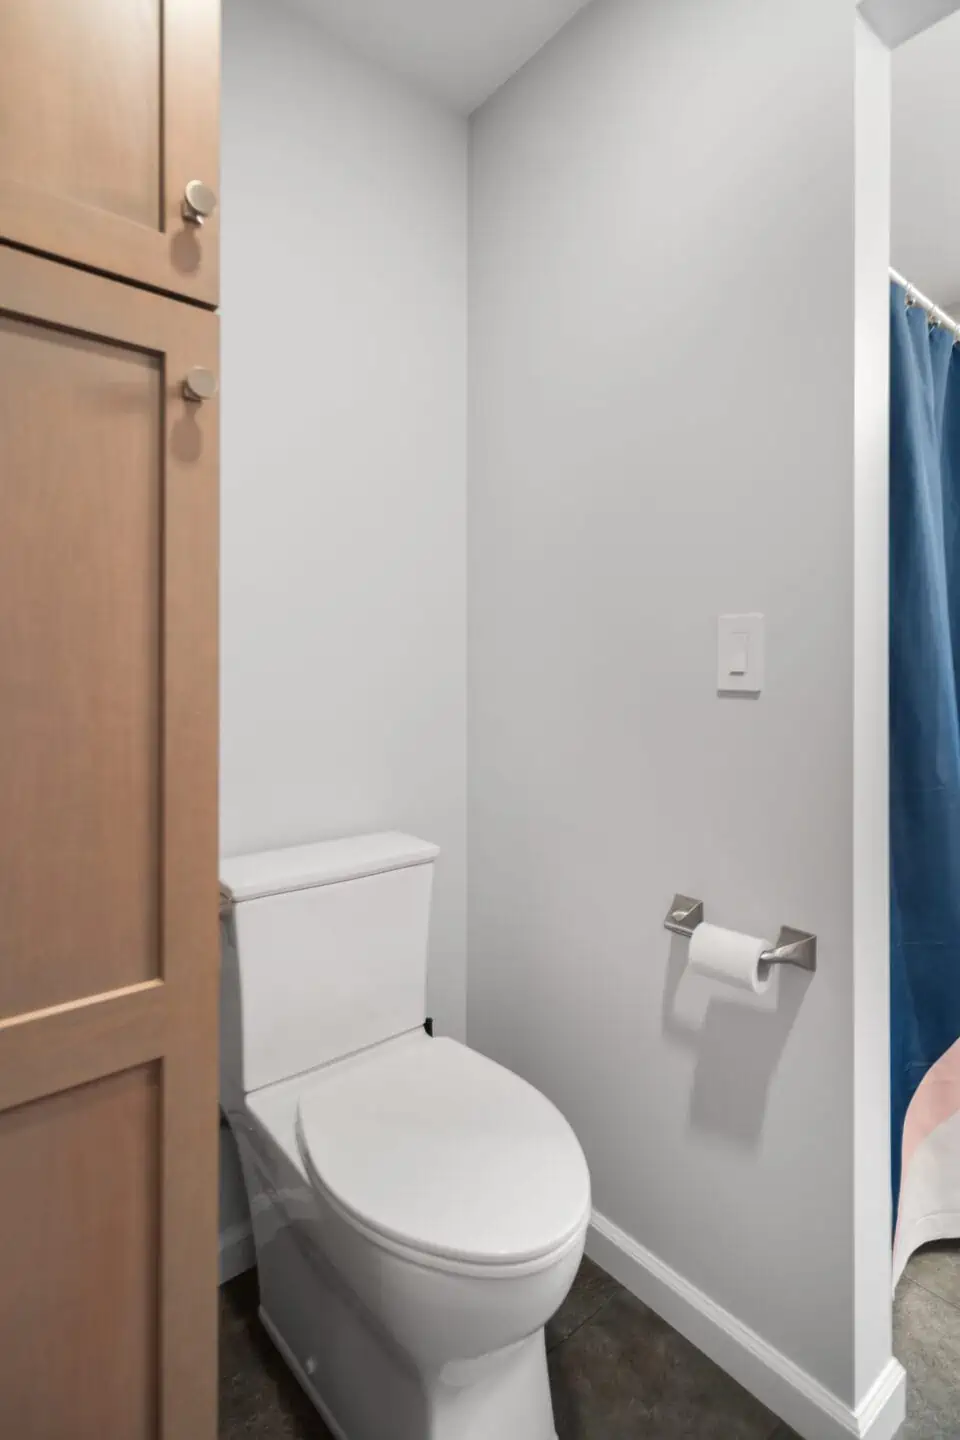 Toilet in remodeled small bathroom